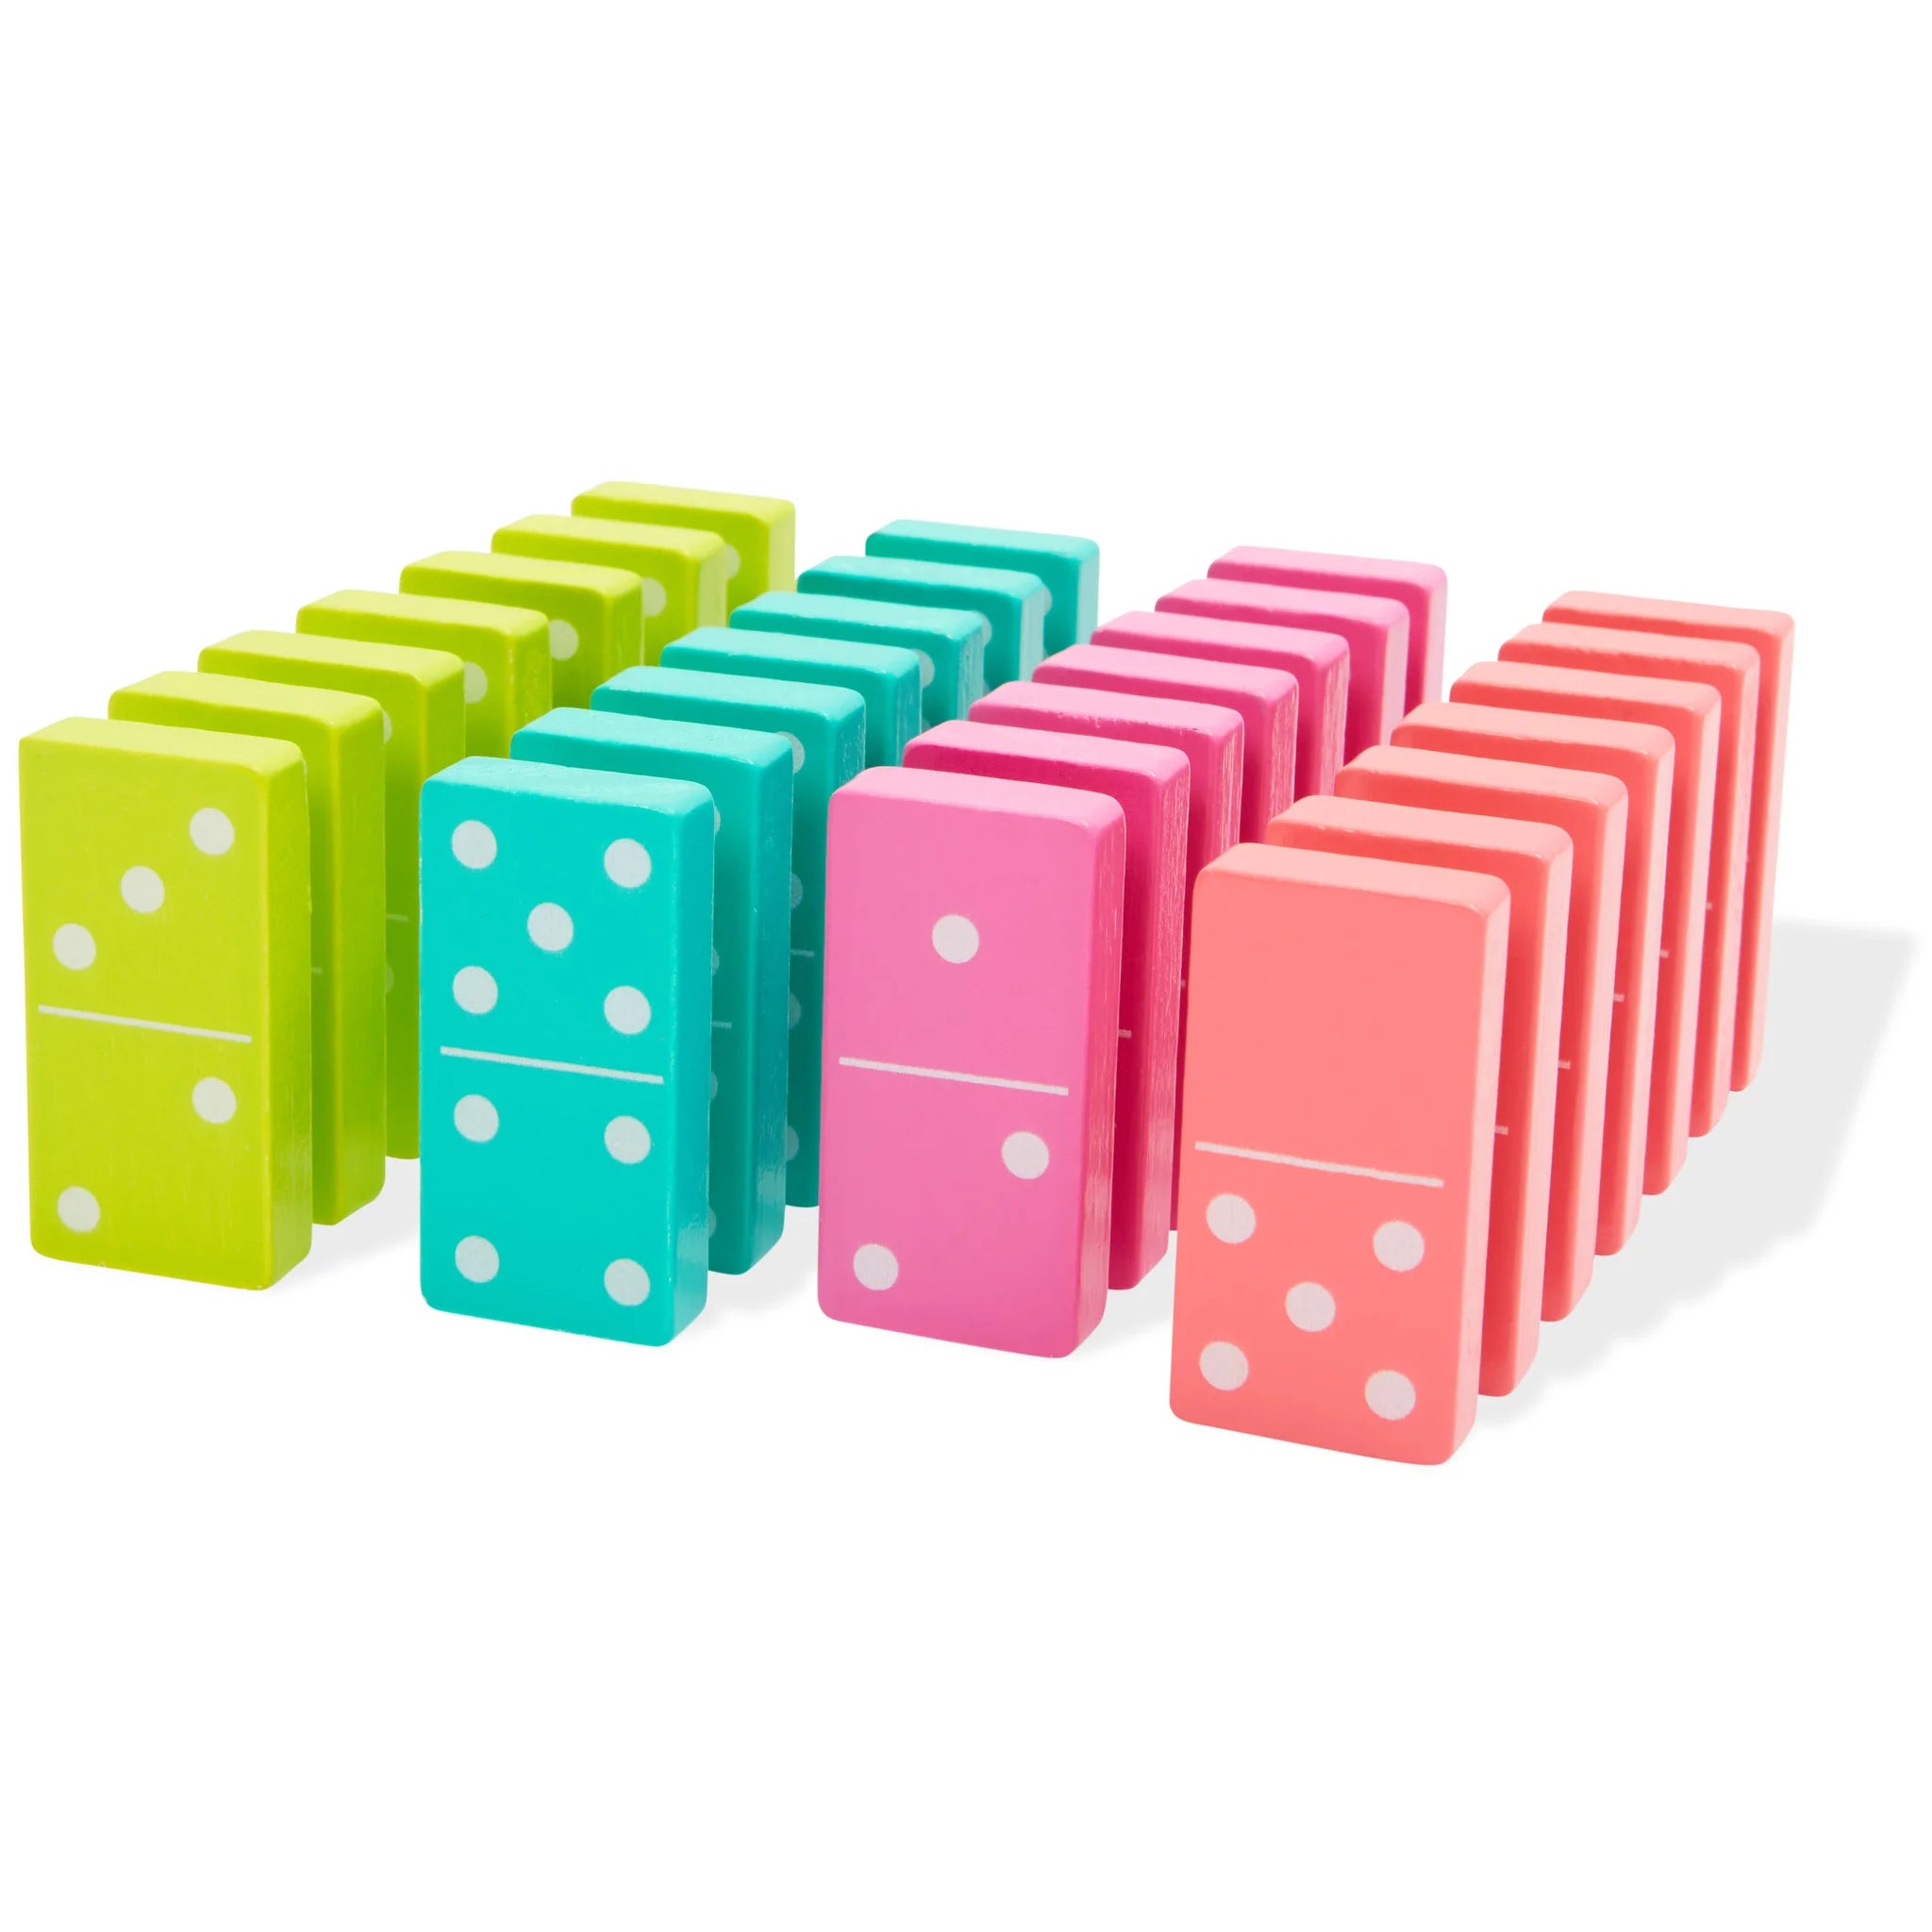 Colourful dominos